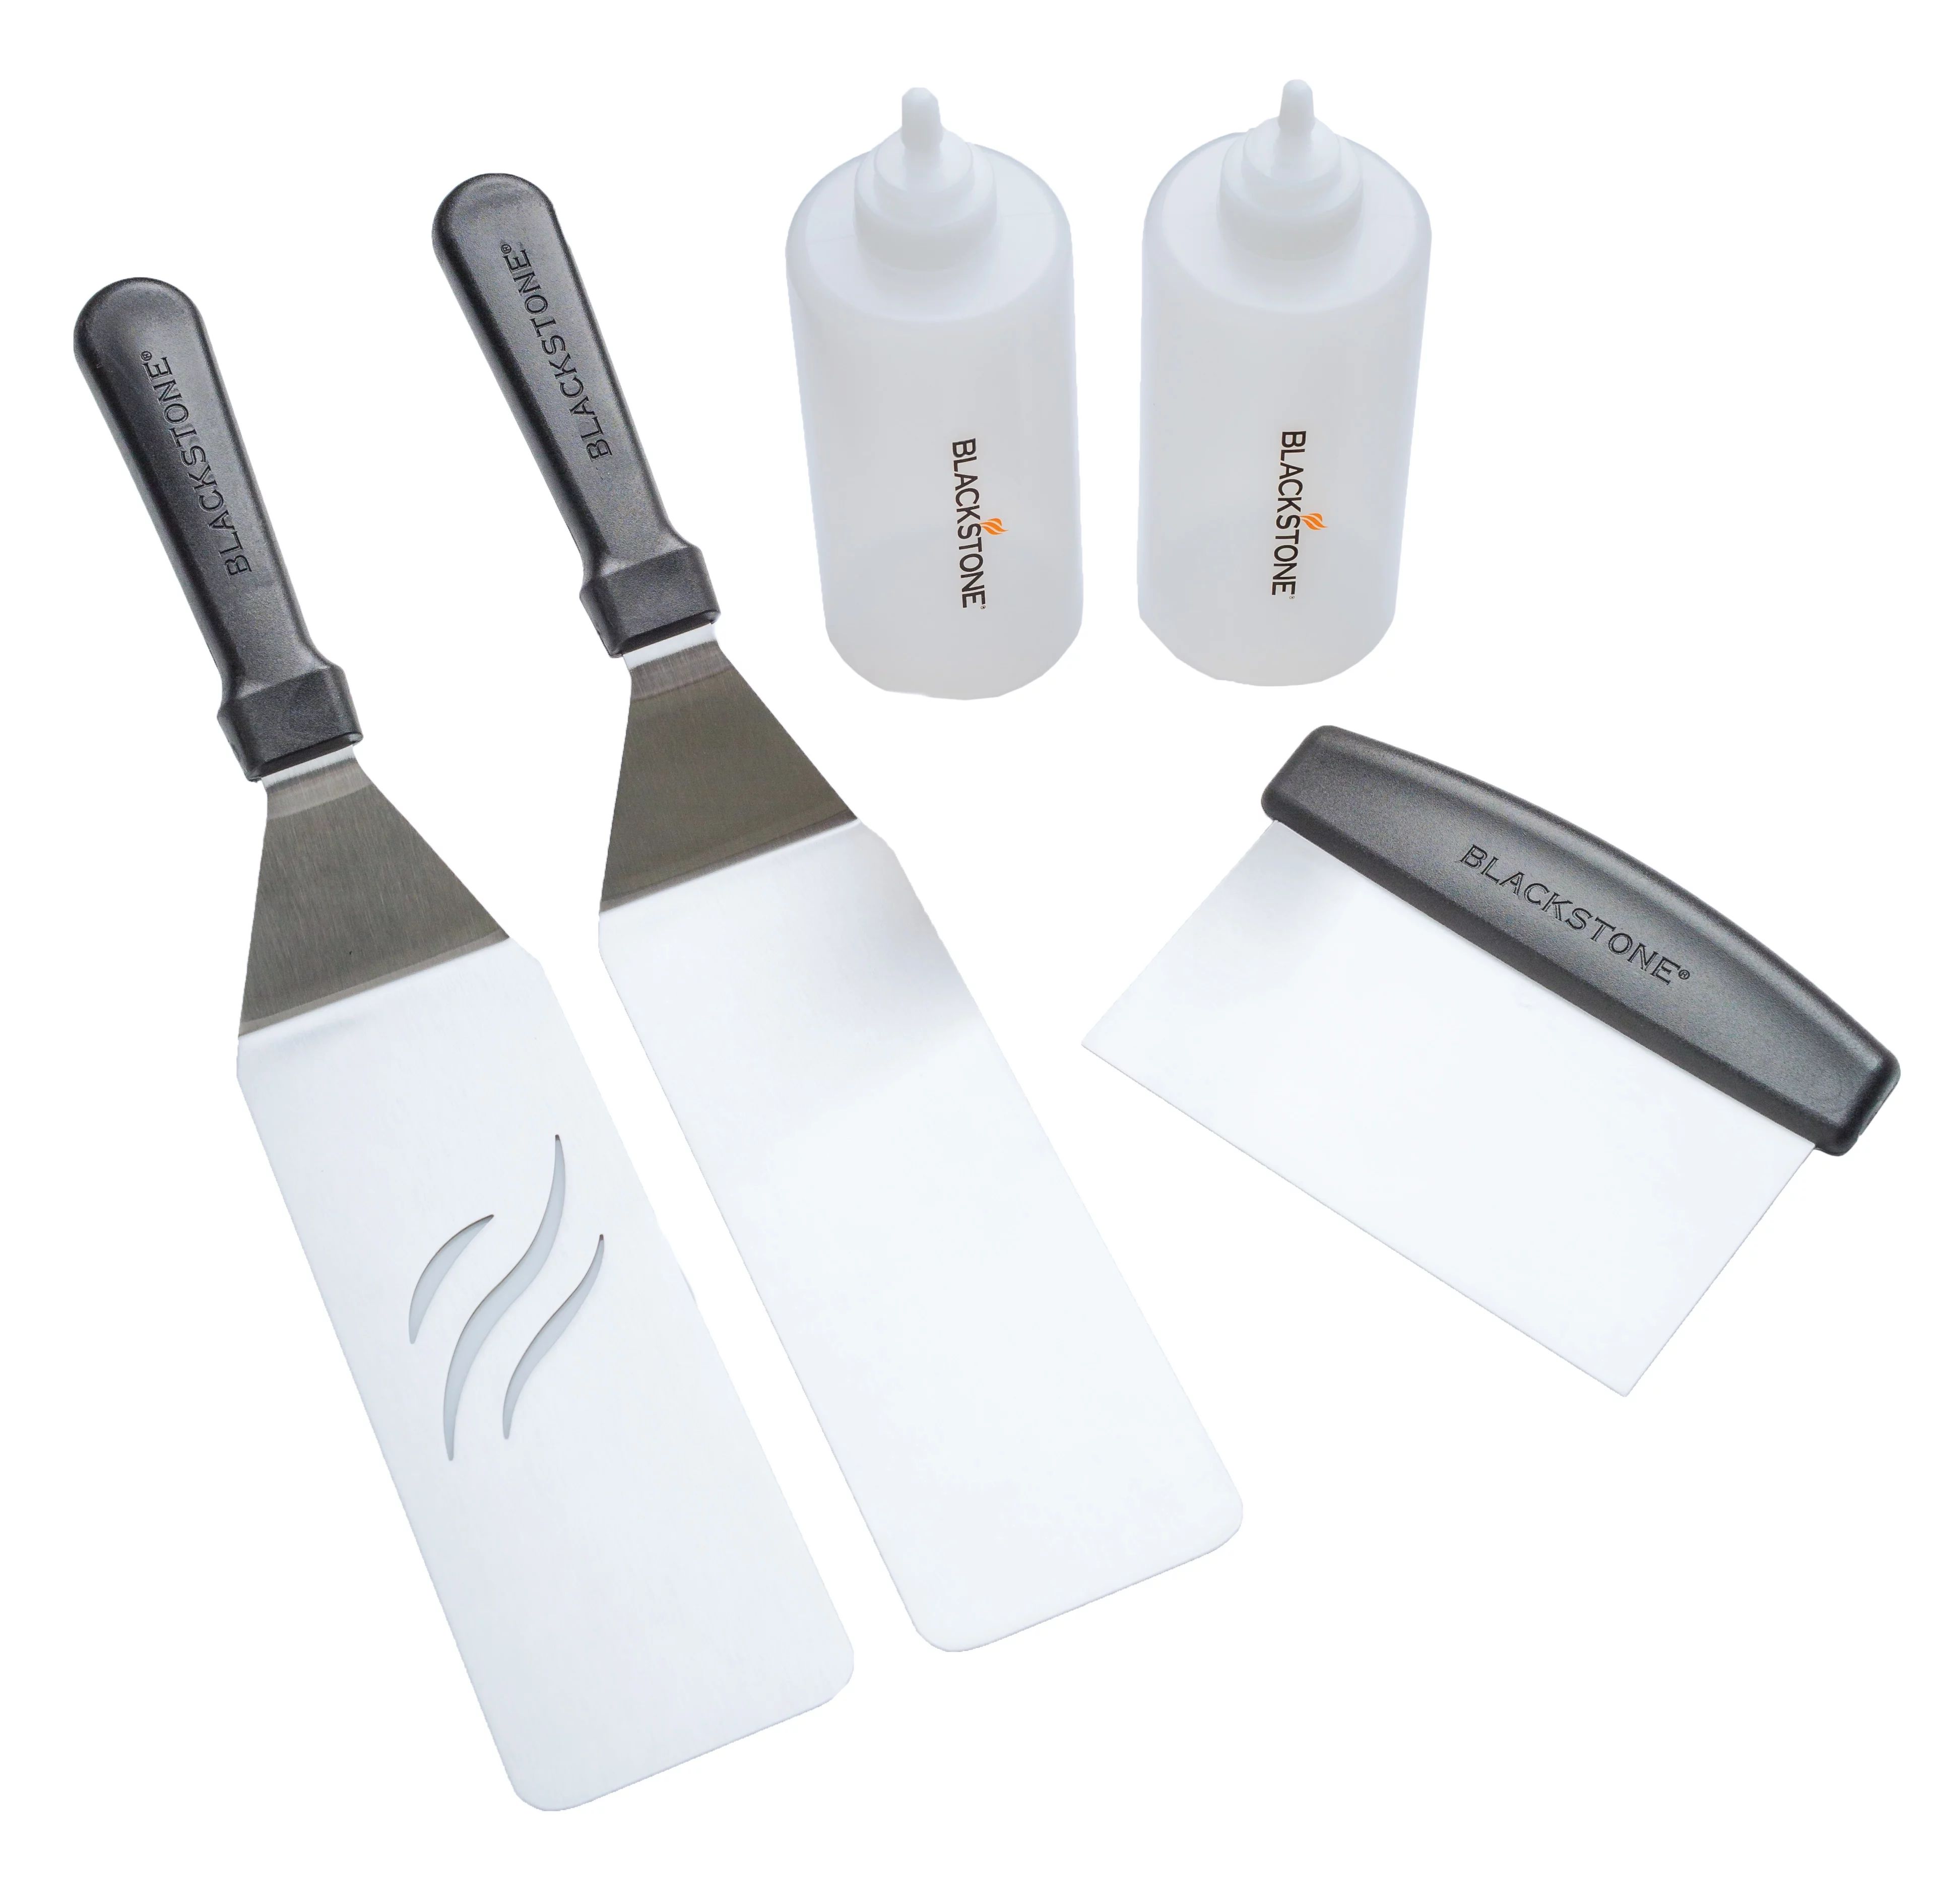 Blackstone 5-Piece Griddle Cooking Tool Kit, Commercial Grade | Walmart (US)